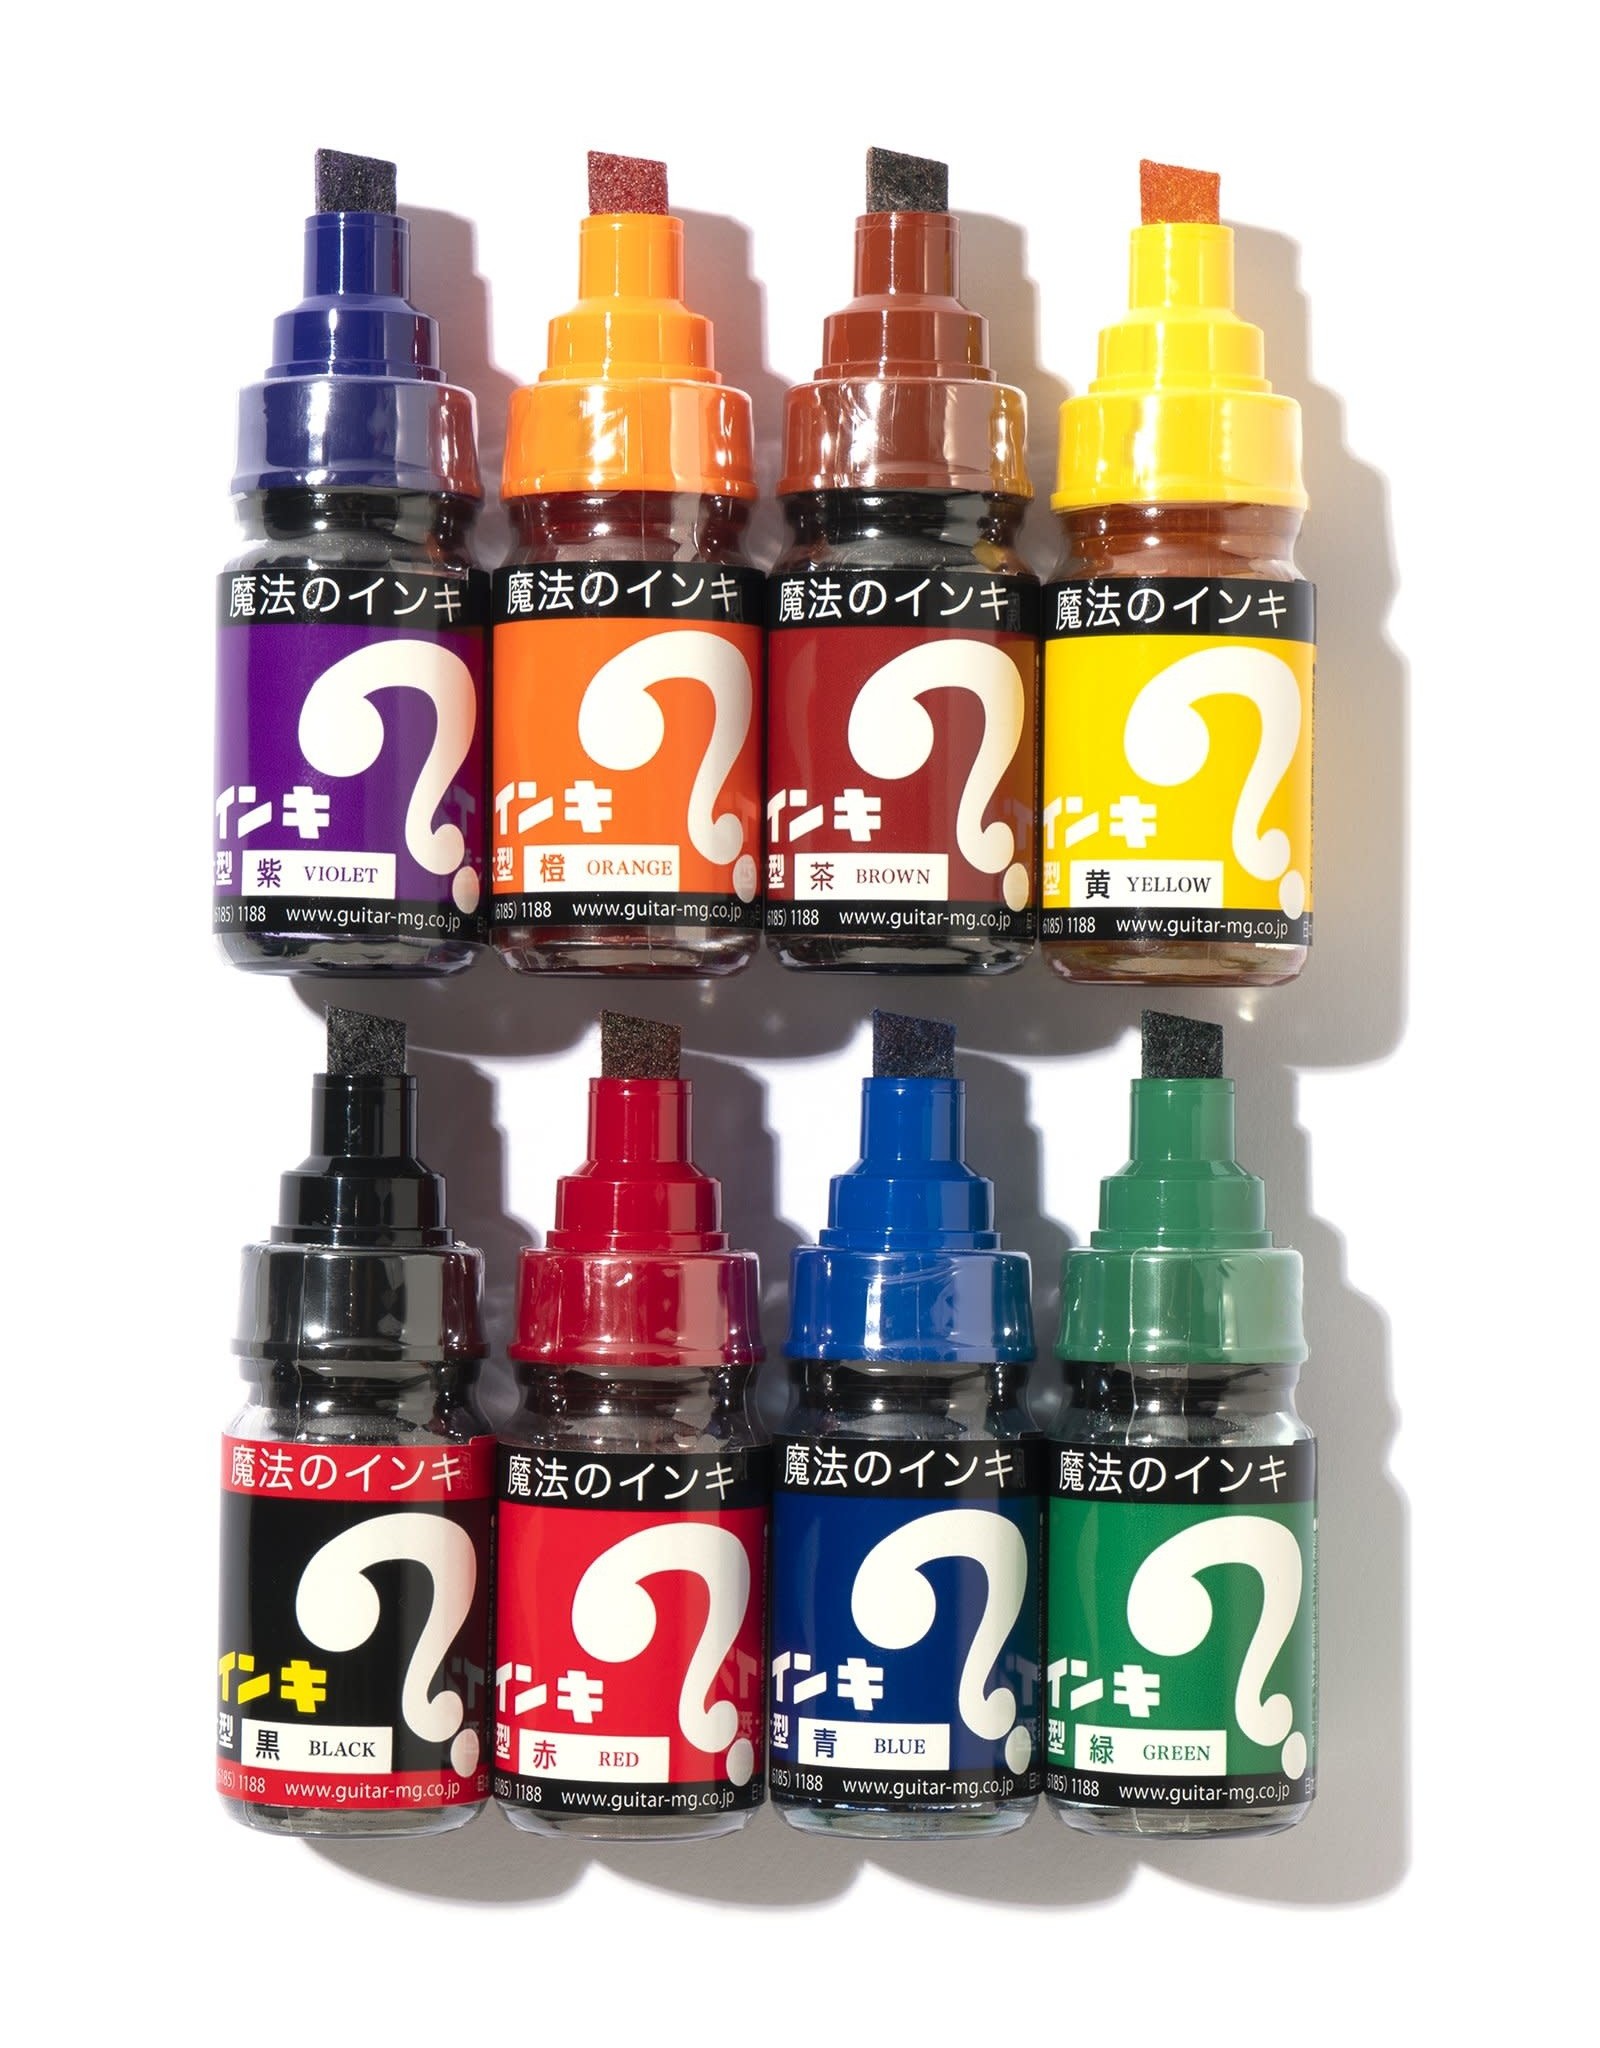 Krink Magic Ink Markers, Set of 8